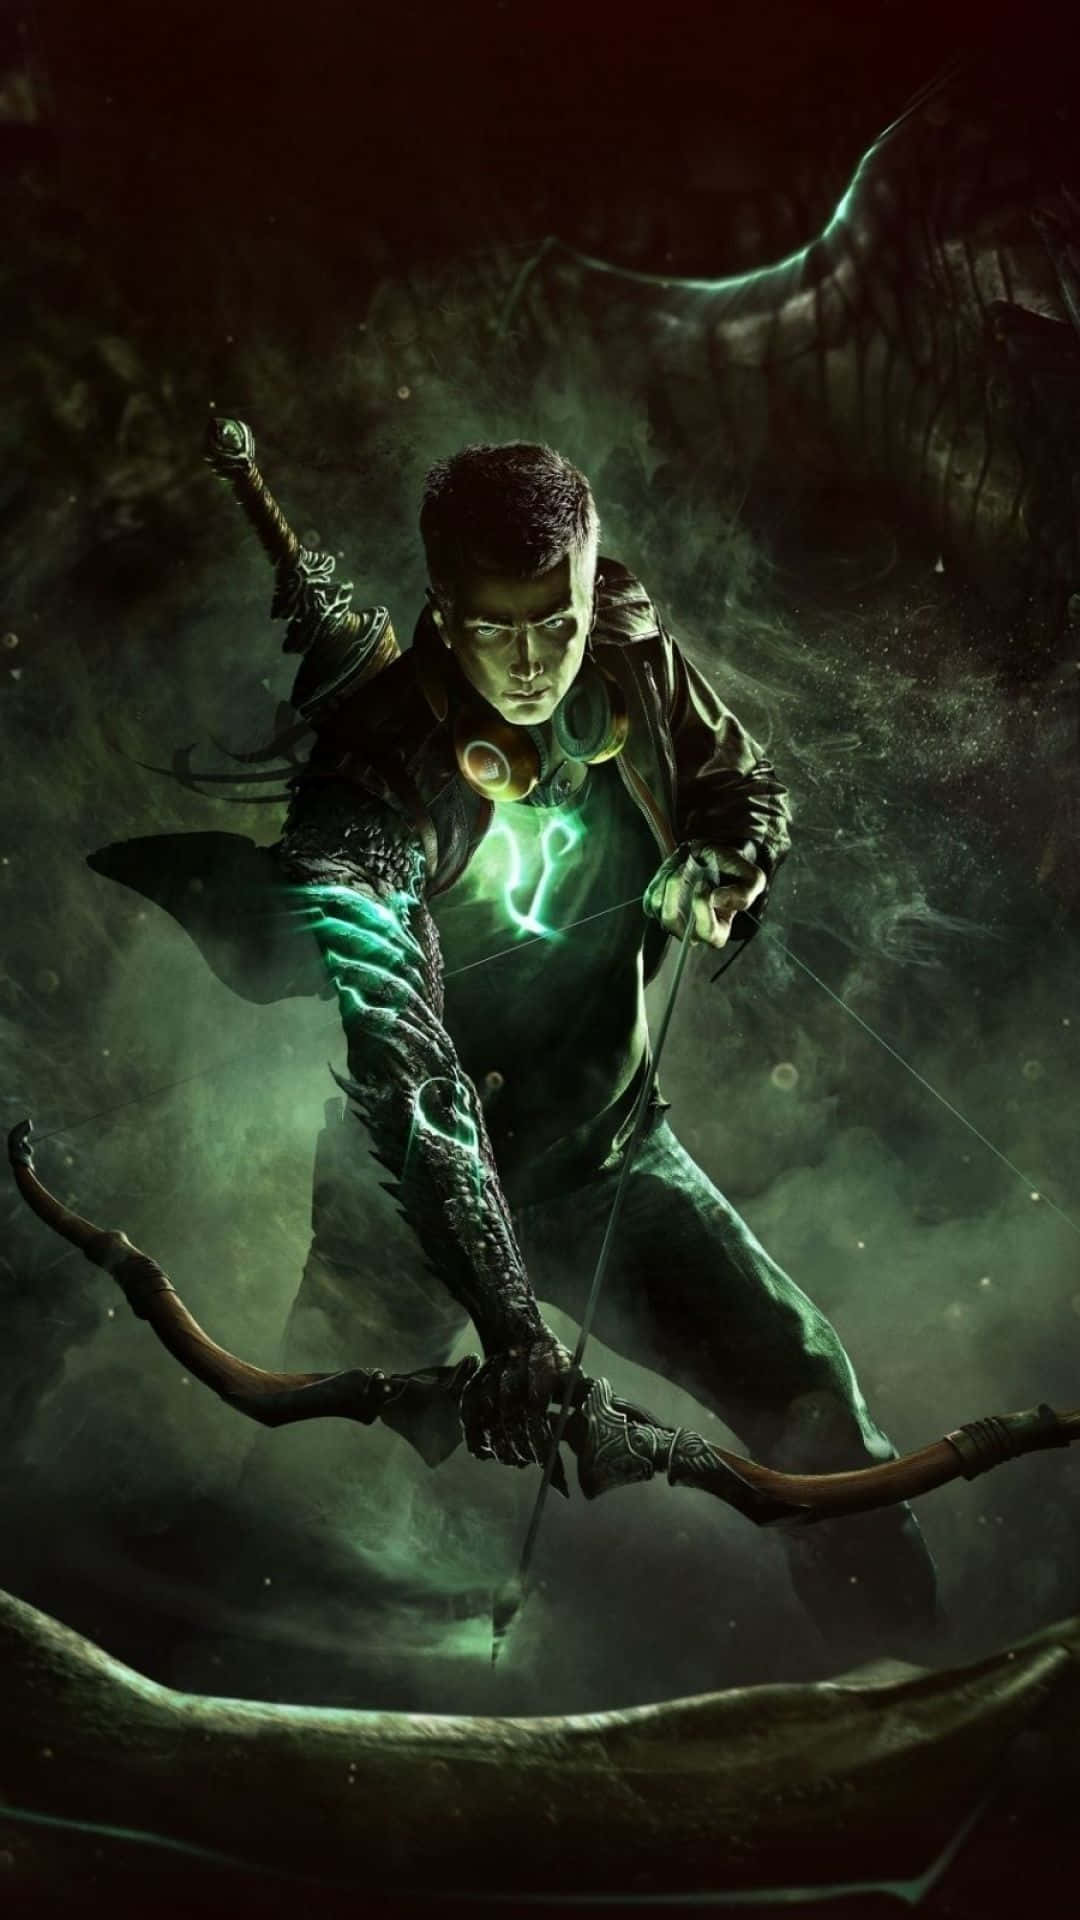 Look Stylish With The New Green Arrow Iphone Wallpaper